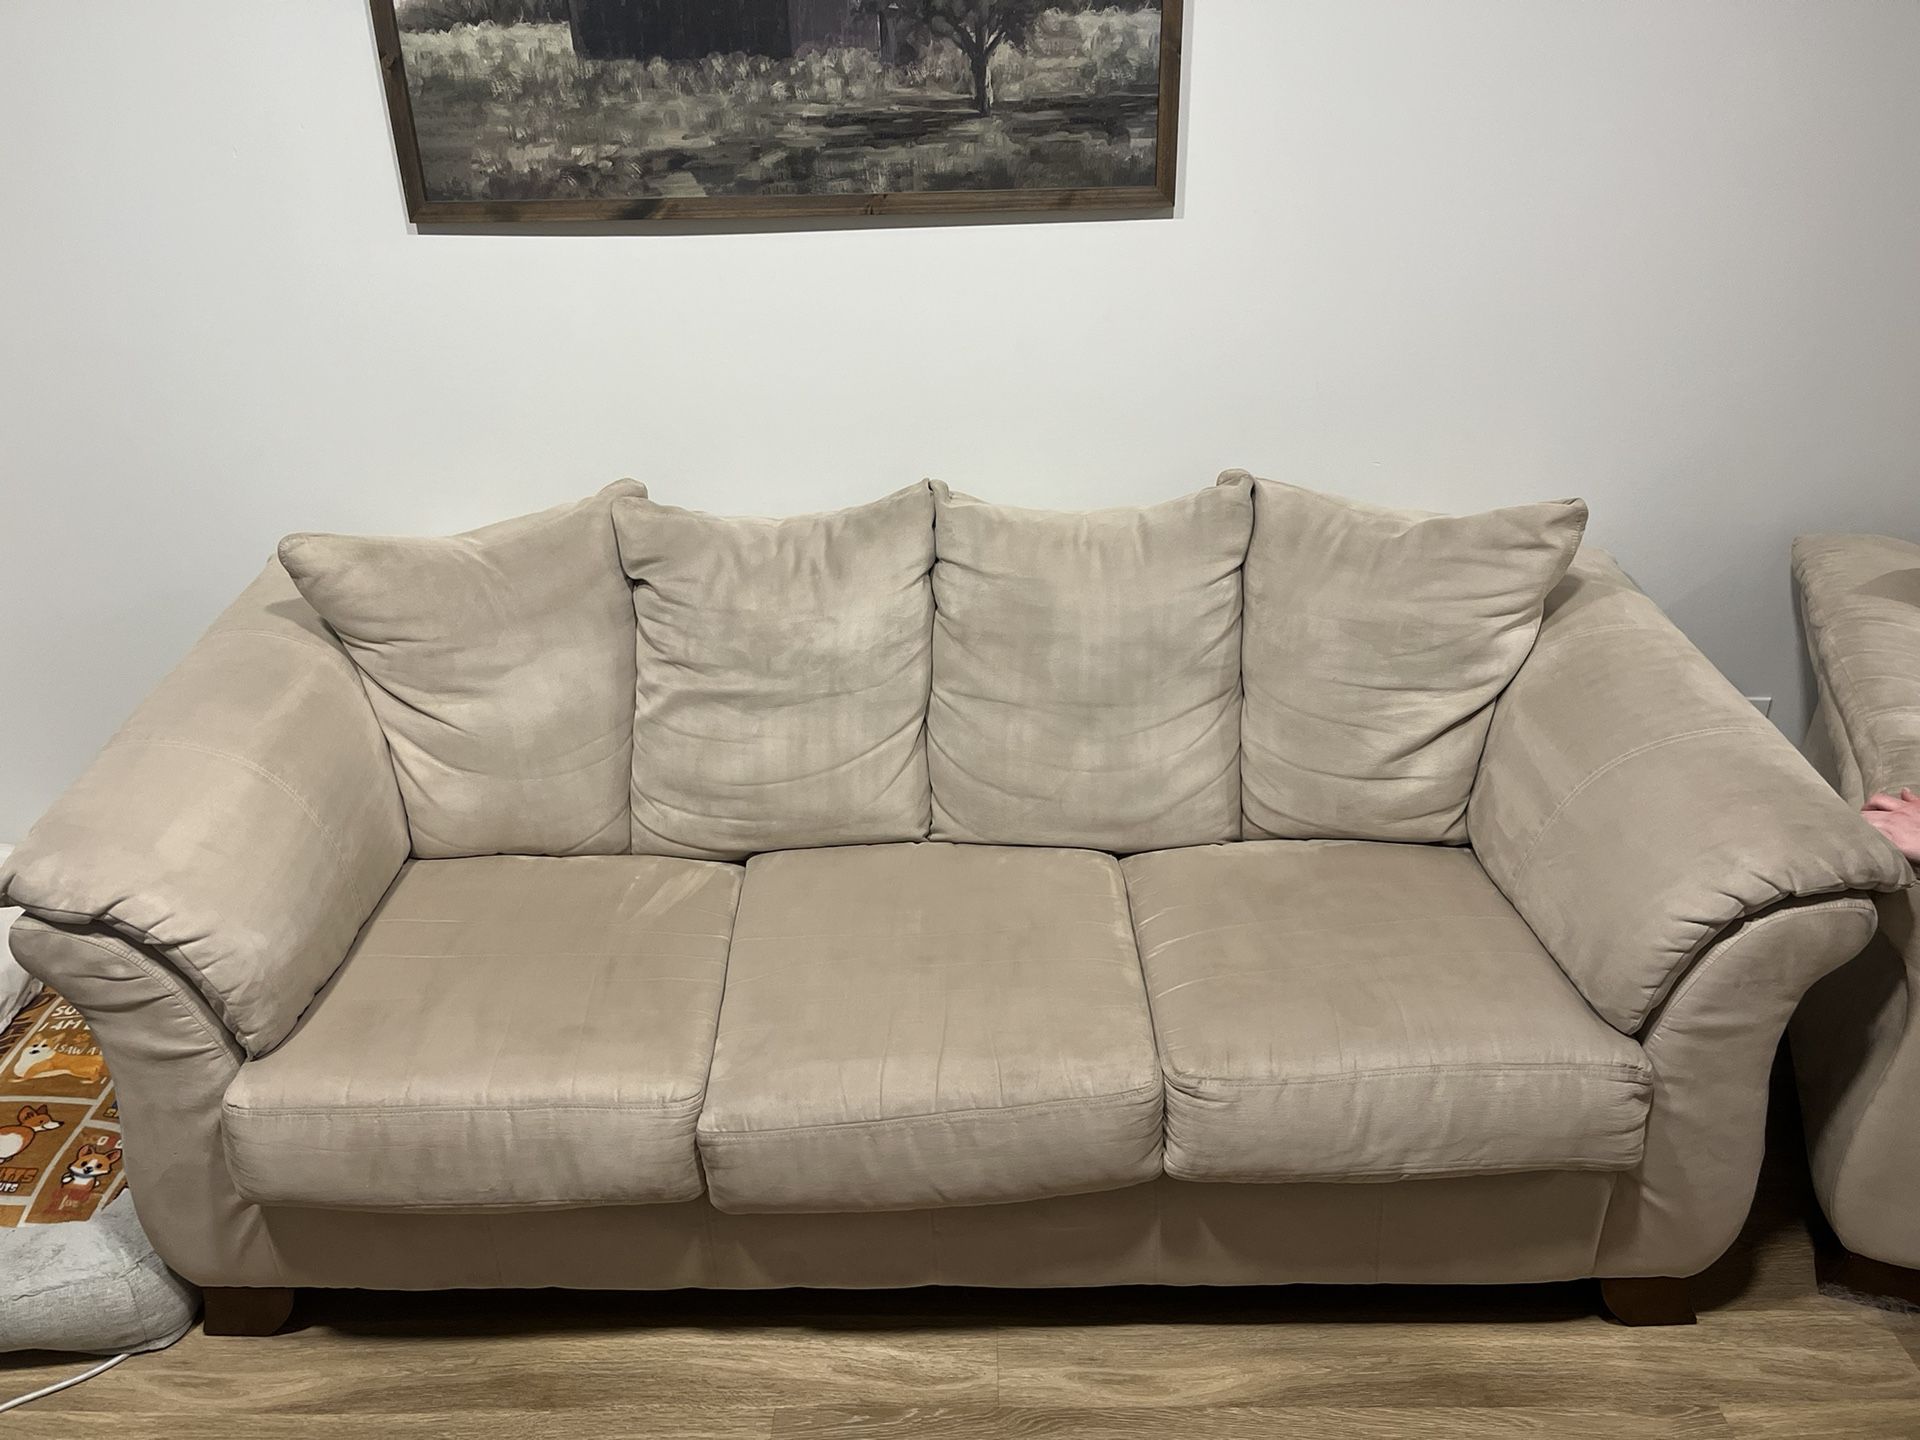 Couch, Chair, and Ottoman For Sale!